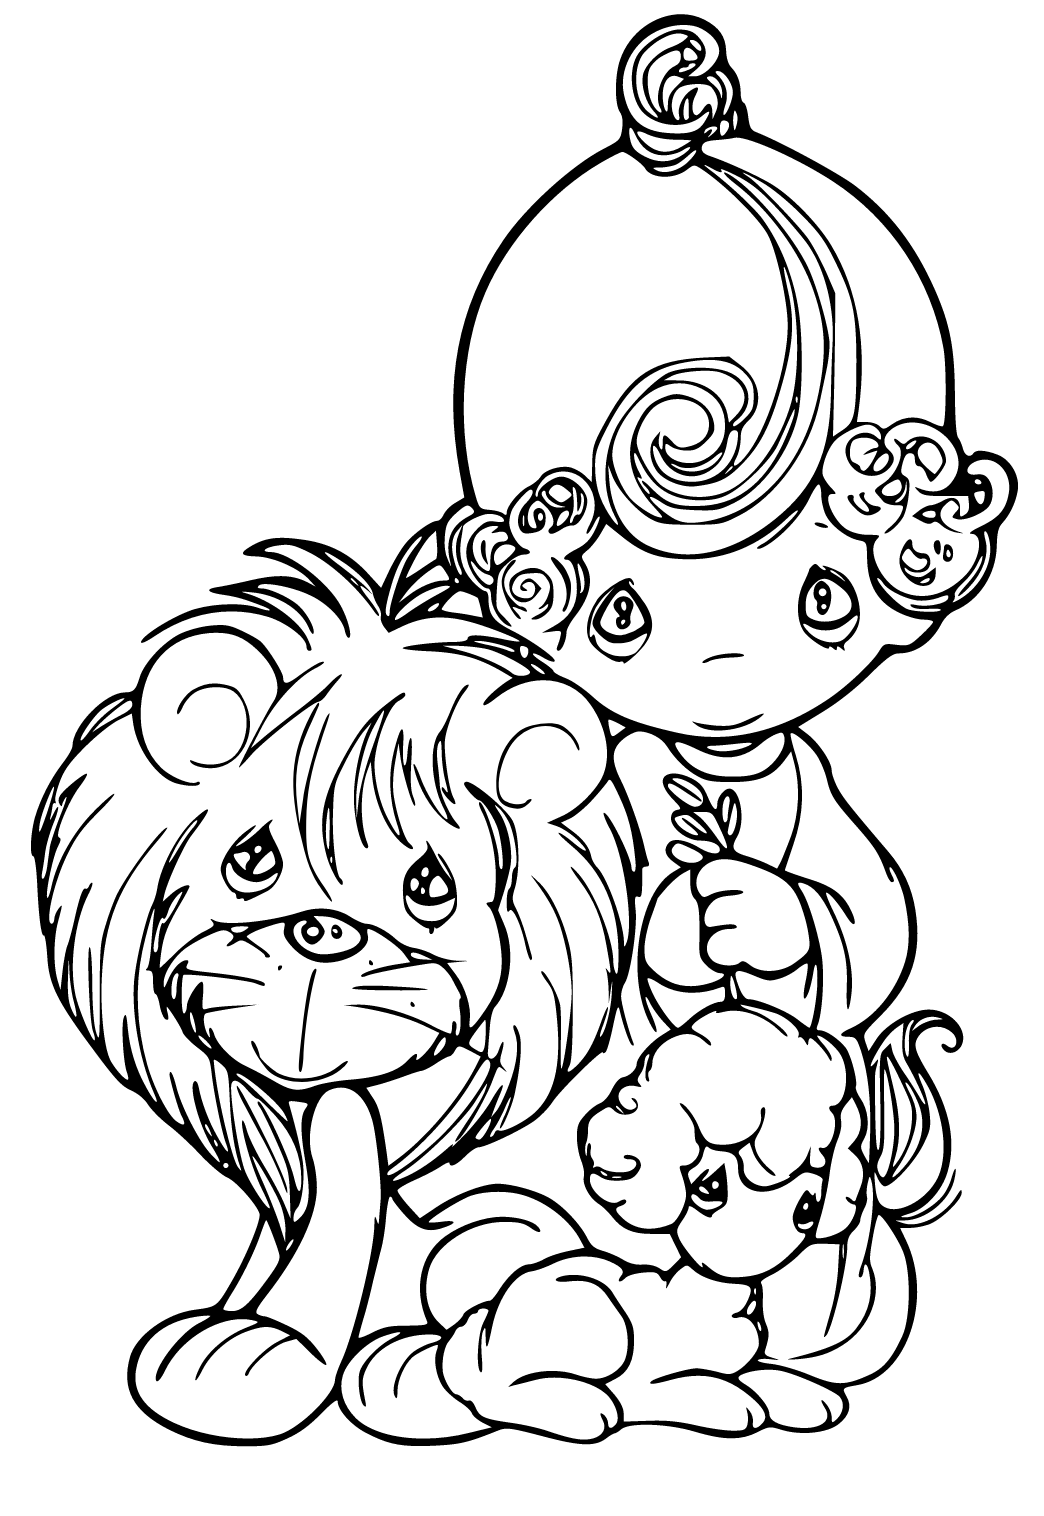 Free printable precious moments animals coloring page for adults and kids